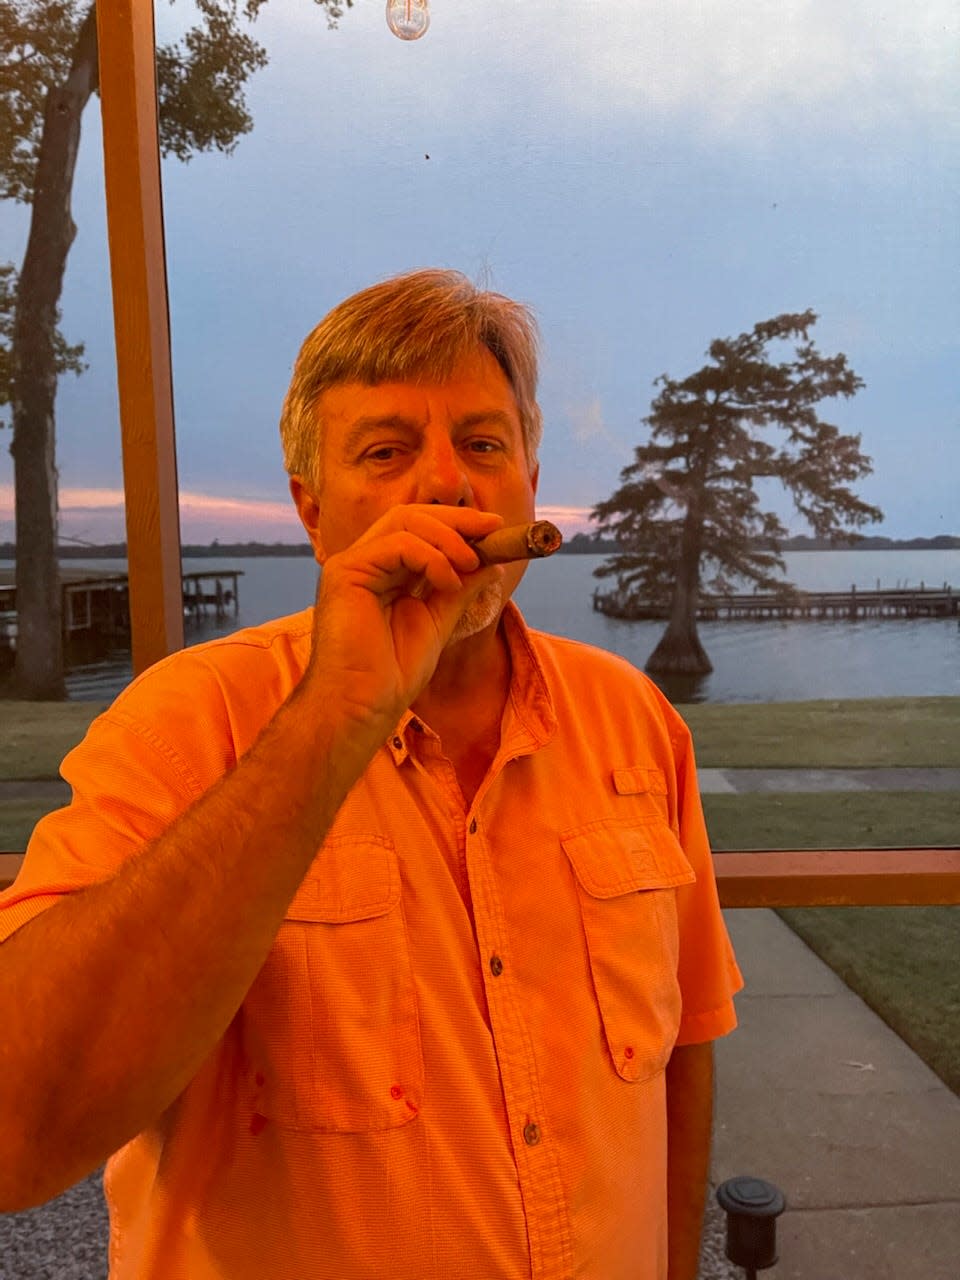 Tennessee fan David Smith reached 62 years old before he ever smoked a cigar. He enjoyed a light at Horseshoe Lake in Arkansas after the Vols upset Alabama 52-49 on Oct. 15, 2022.